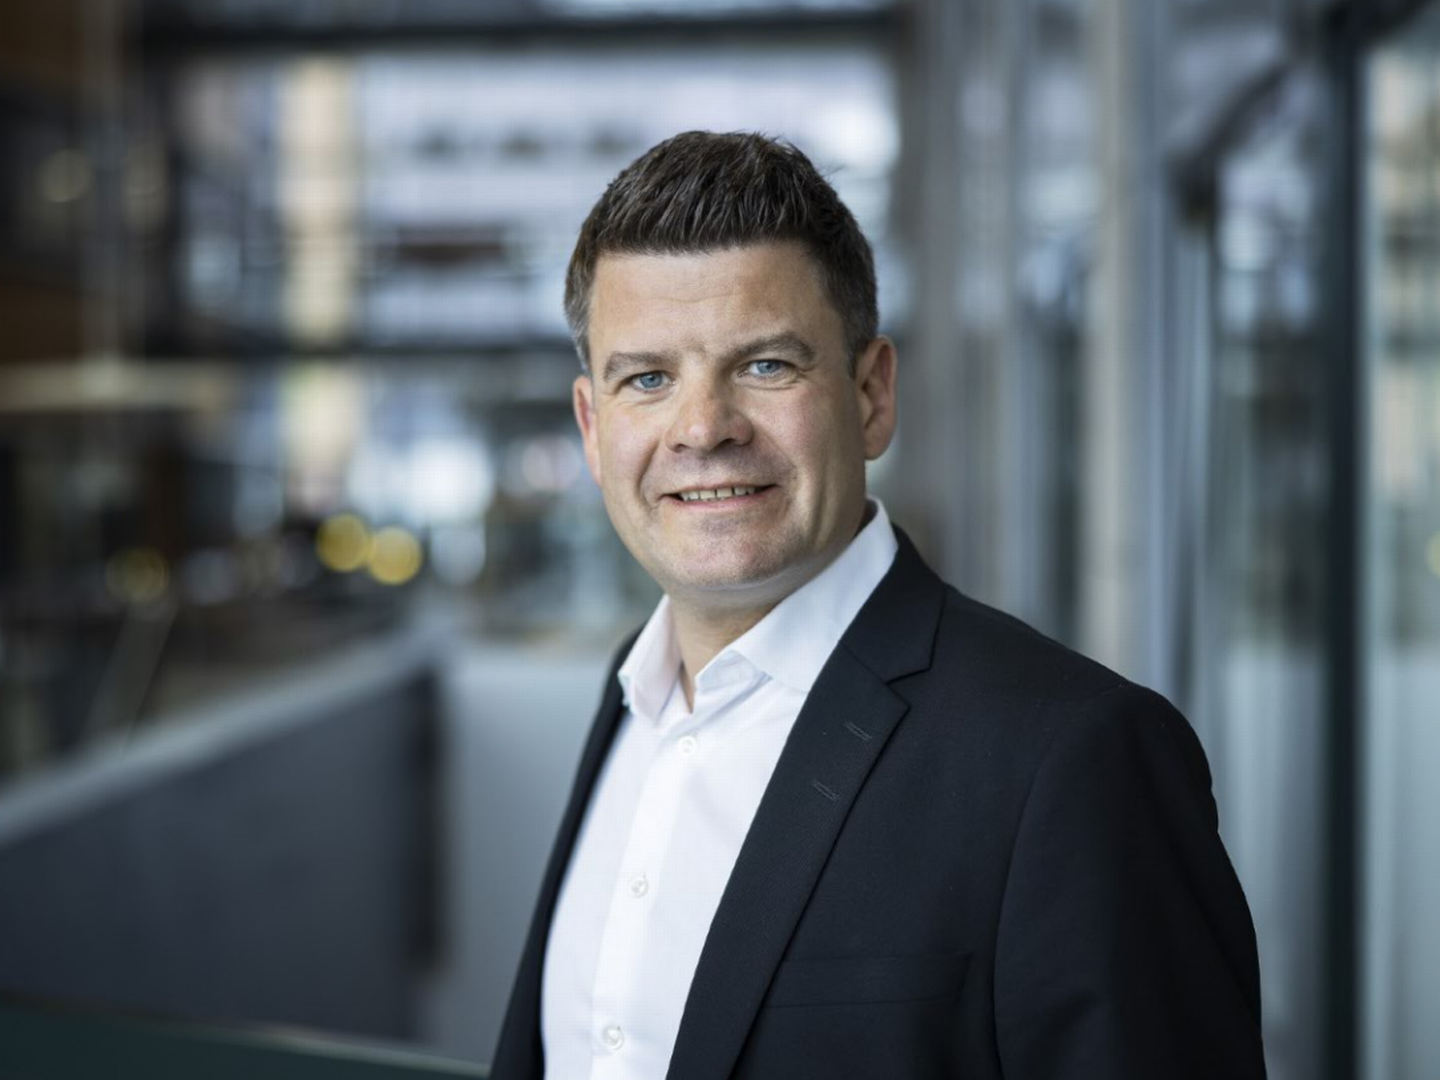 Lasse Kristoffersen, CEO of Wallenius Wilhelmsen, doubts that terminal operators will increase port capacity at the same rate as the many new ships are delivered. | Photo: Wallenius Wilhelmsen